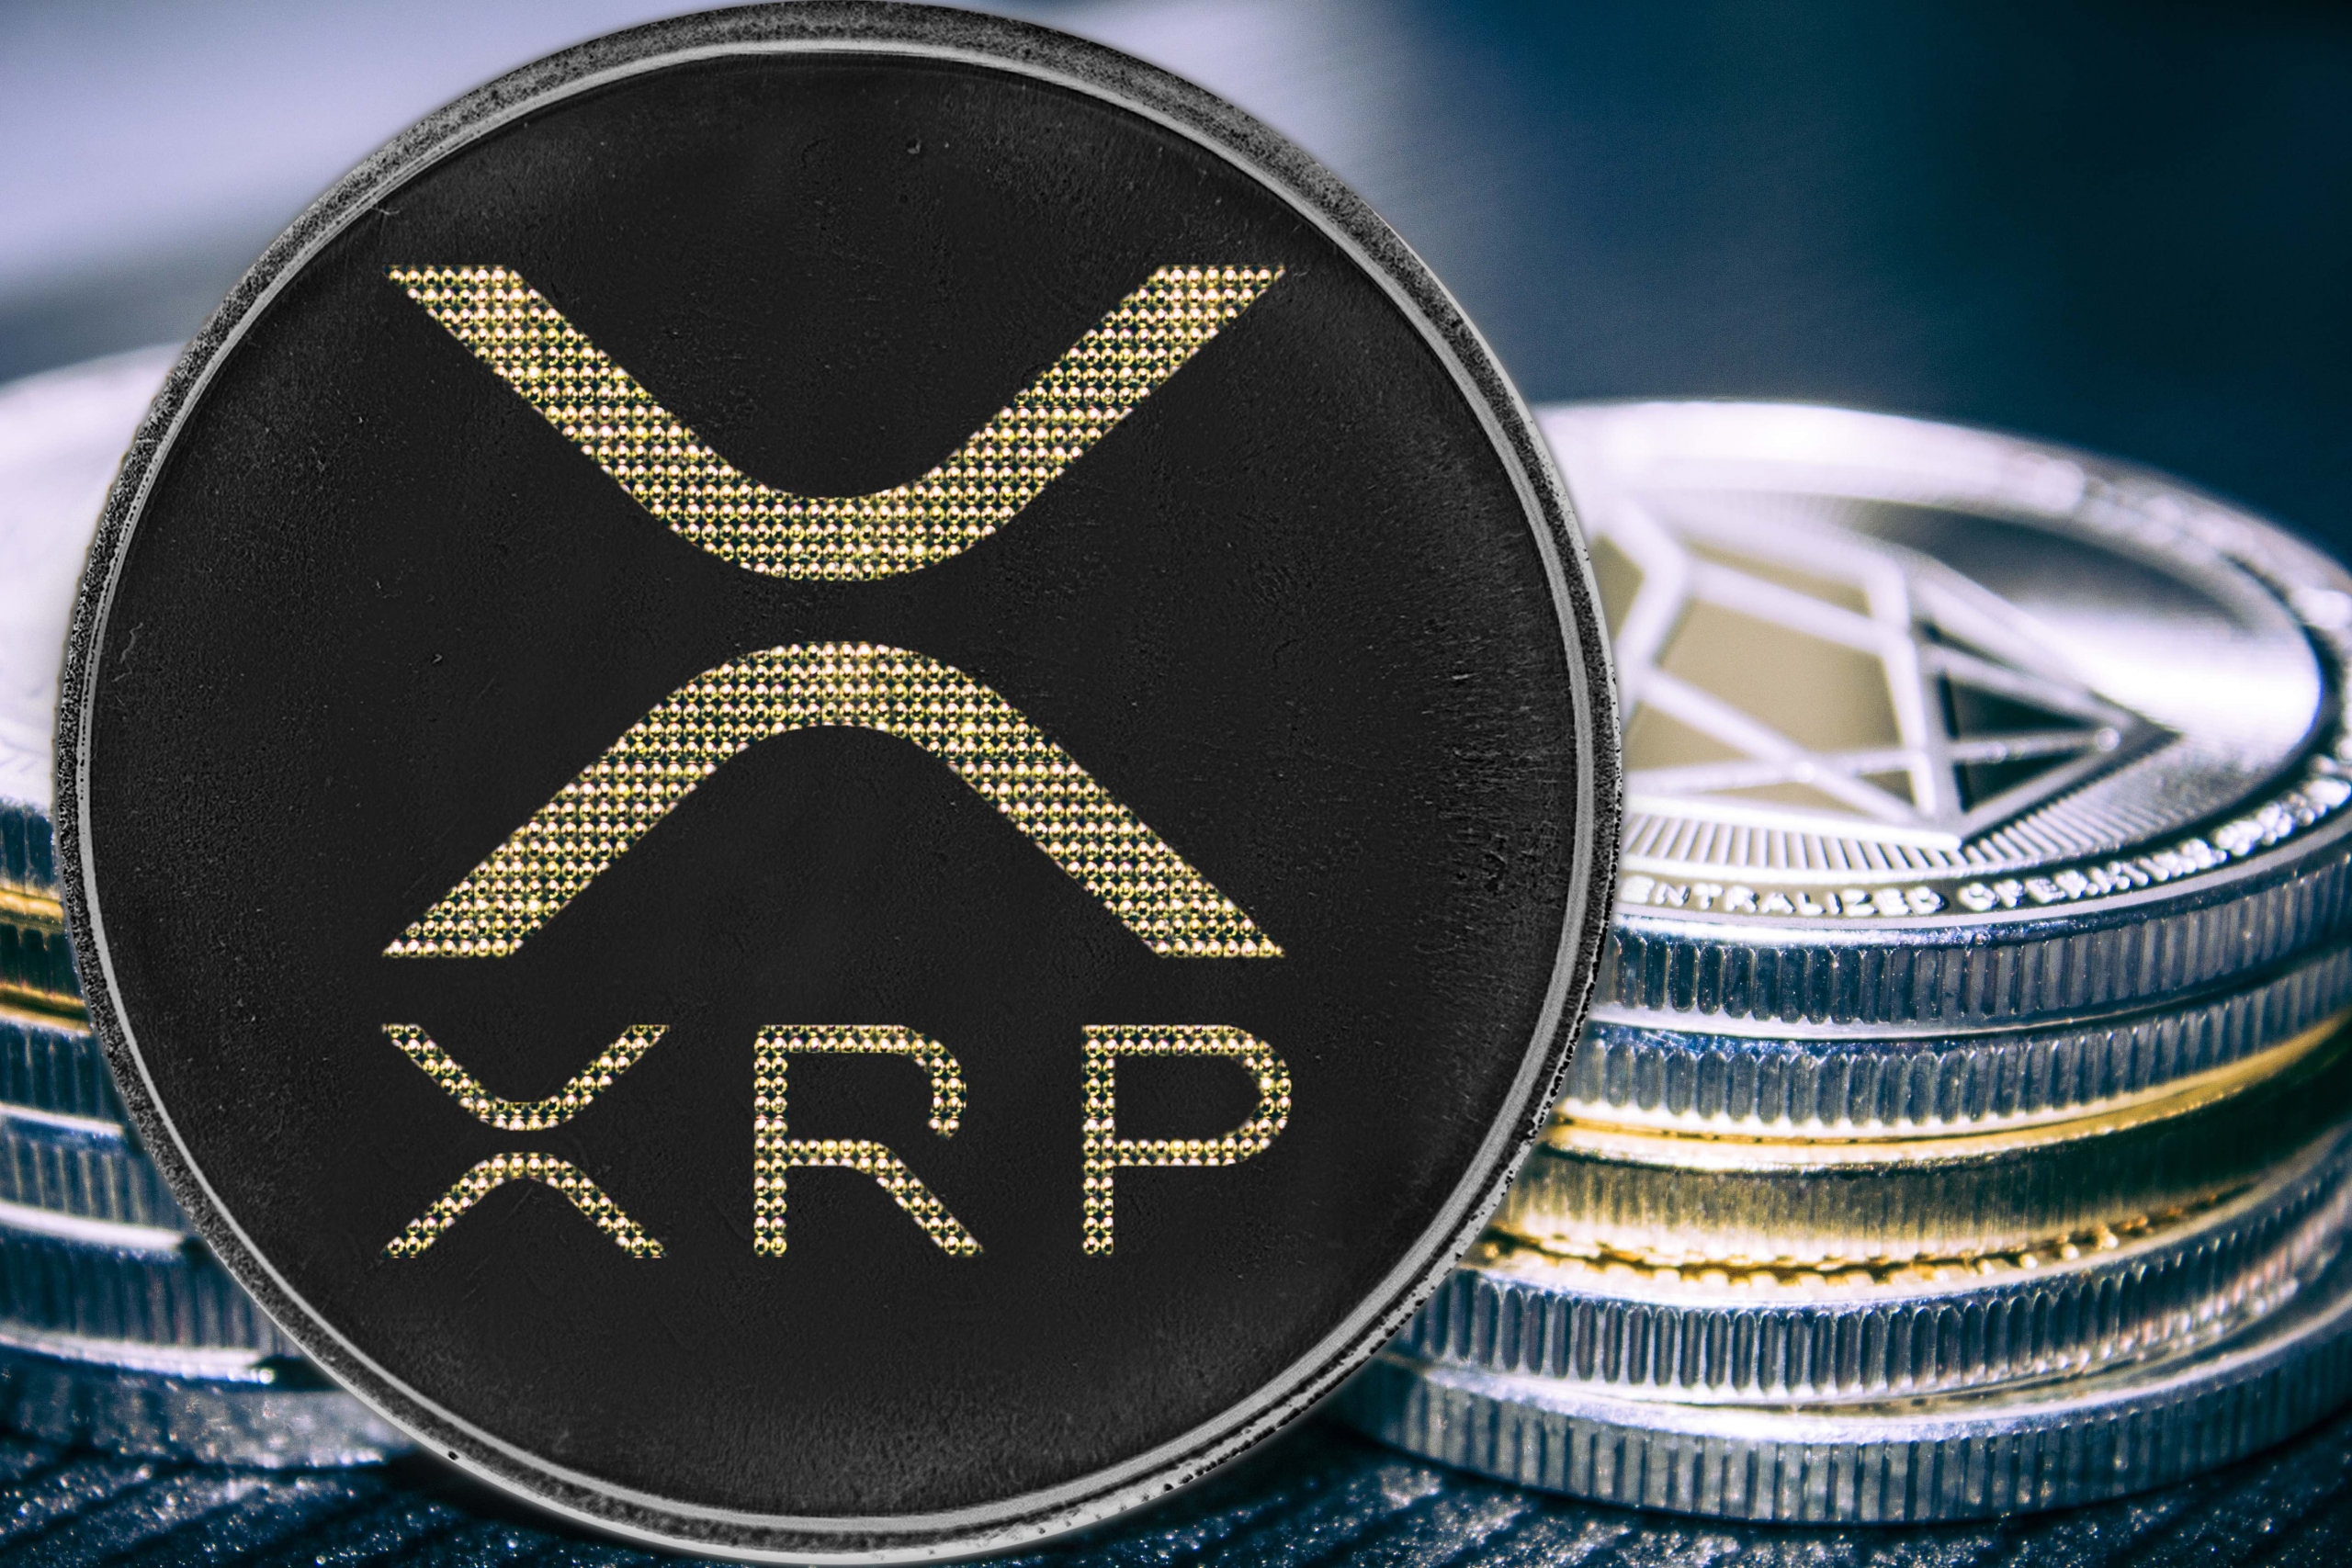 xrp price charts first 'death cross' since april 2018 - coindesk